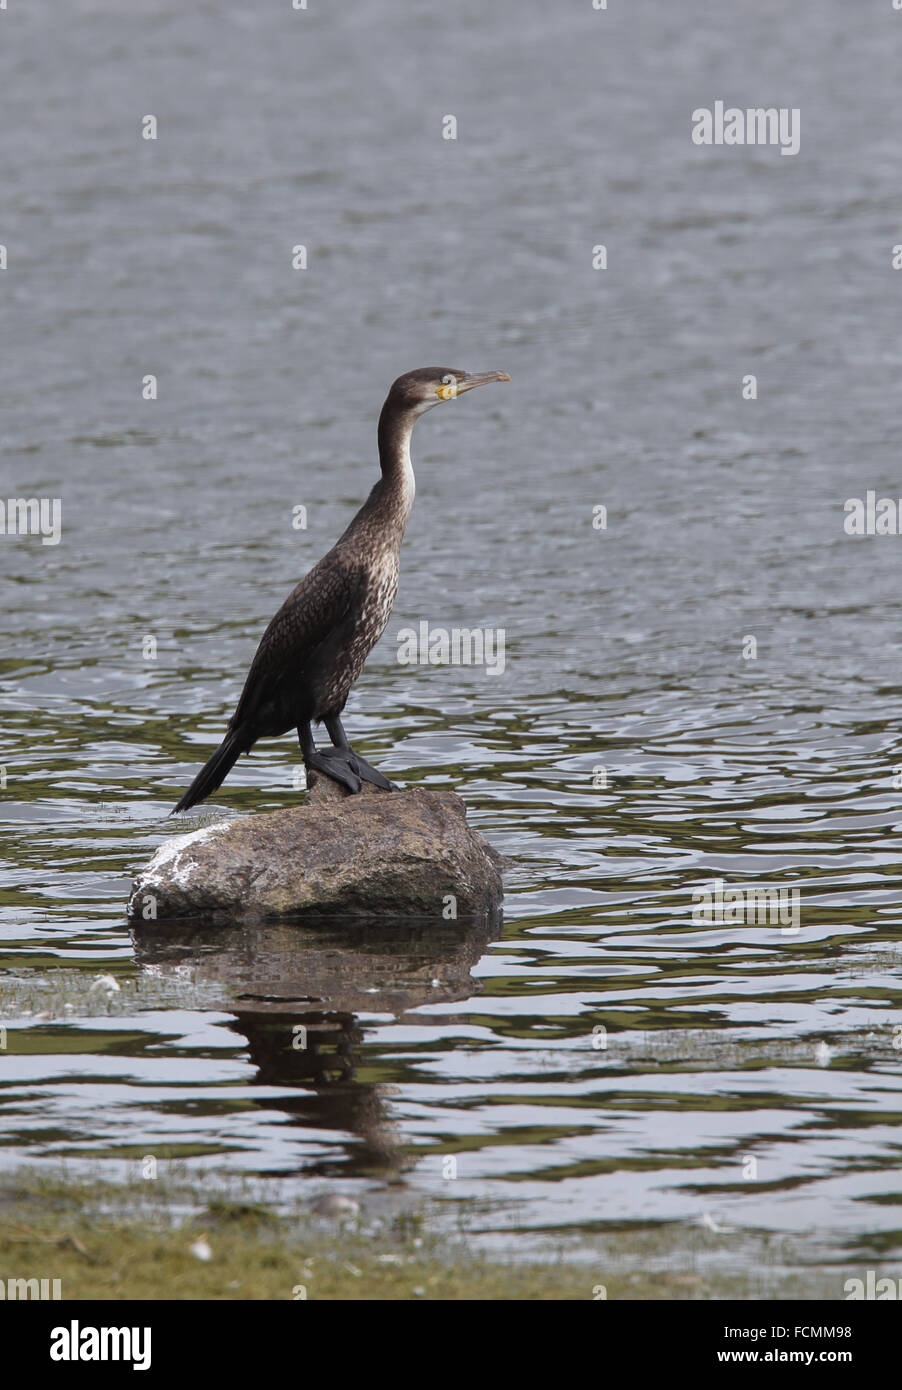 Young Cormorant (Phalacrocorax carbo) standing on a rock, Drift Reservoir, Cornwall, England, UK. Stock Photo